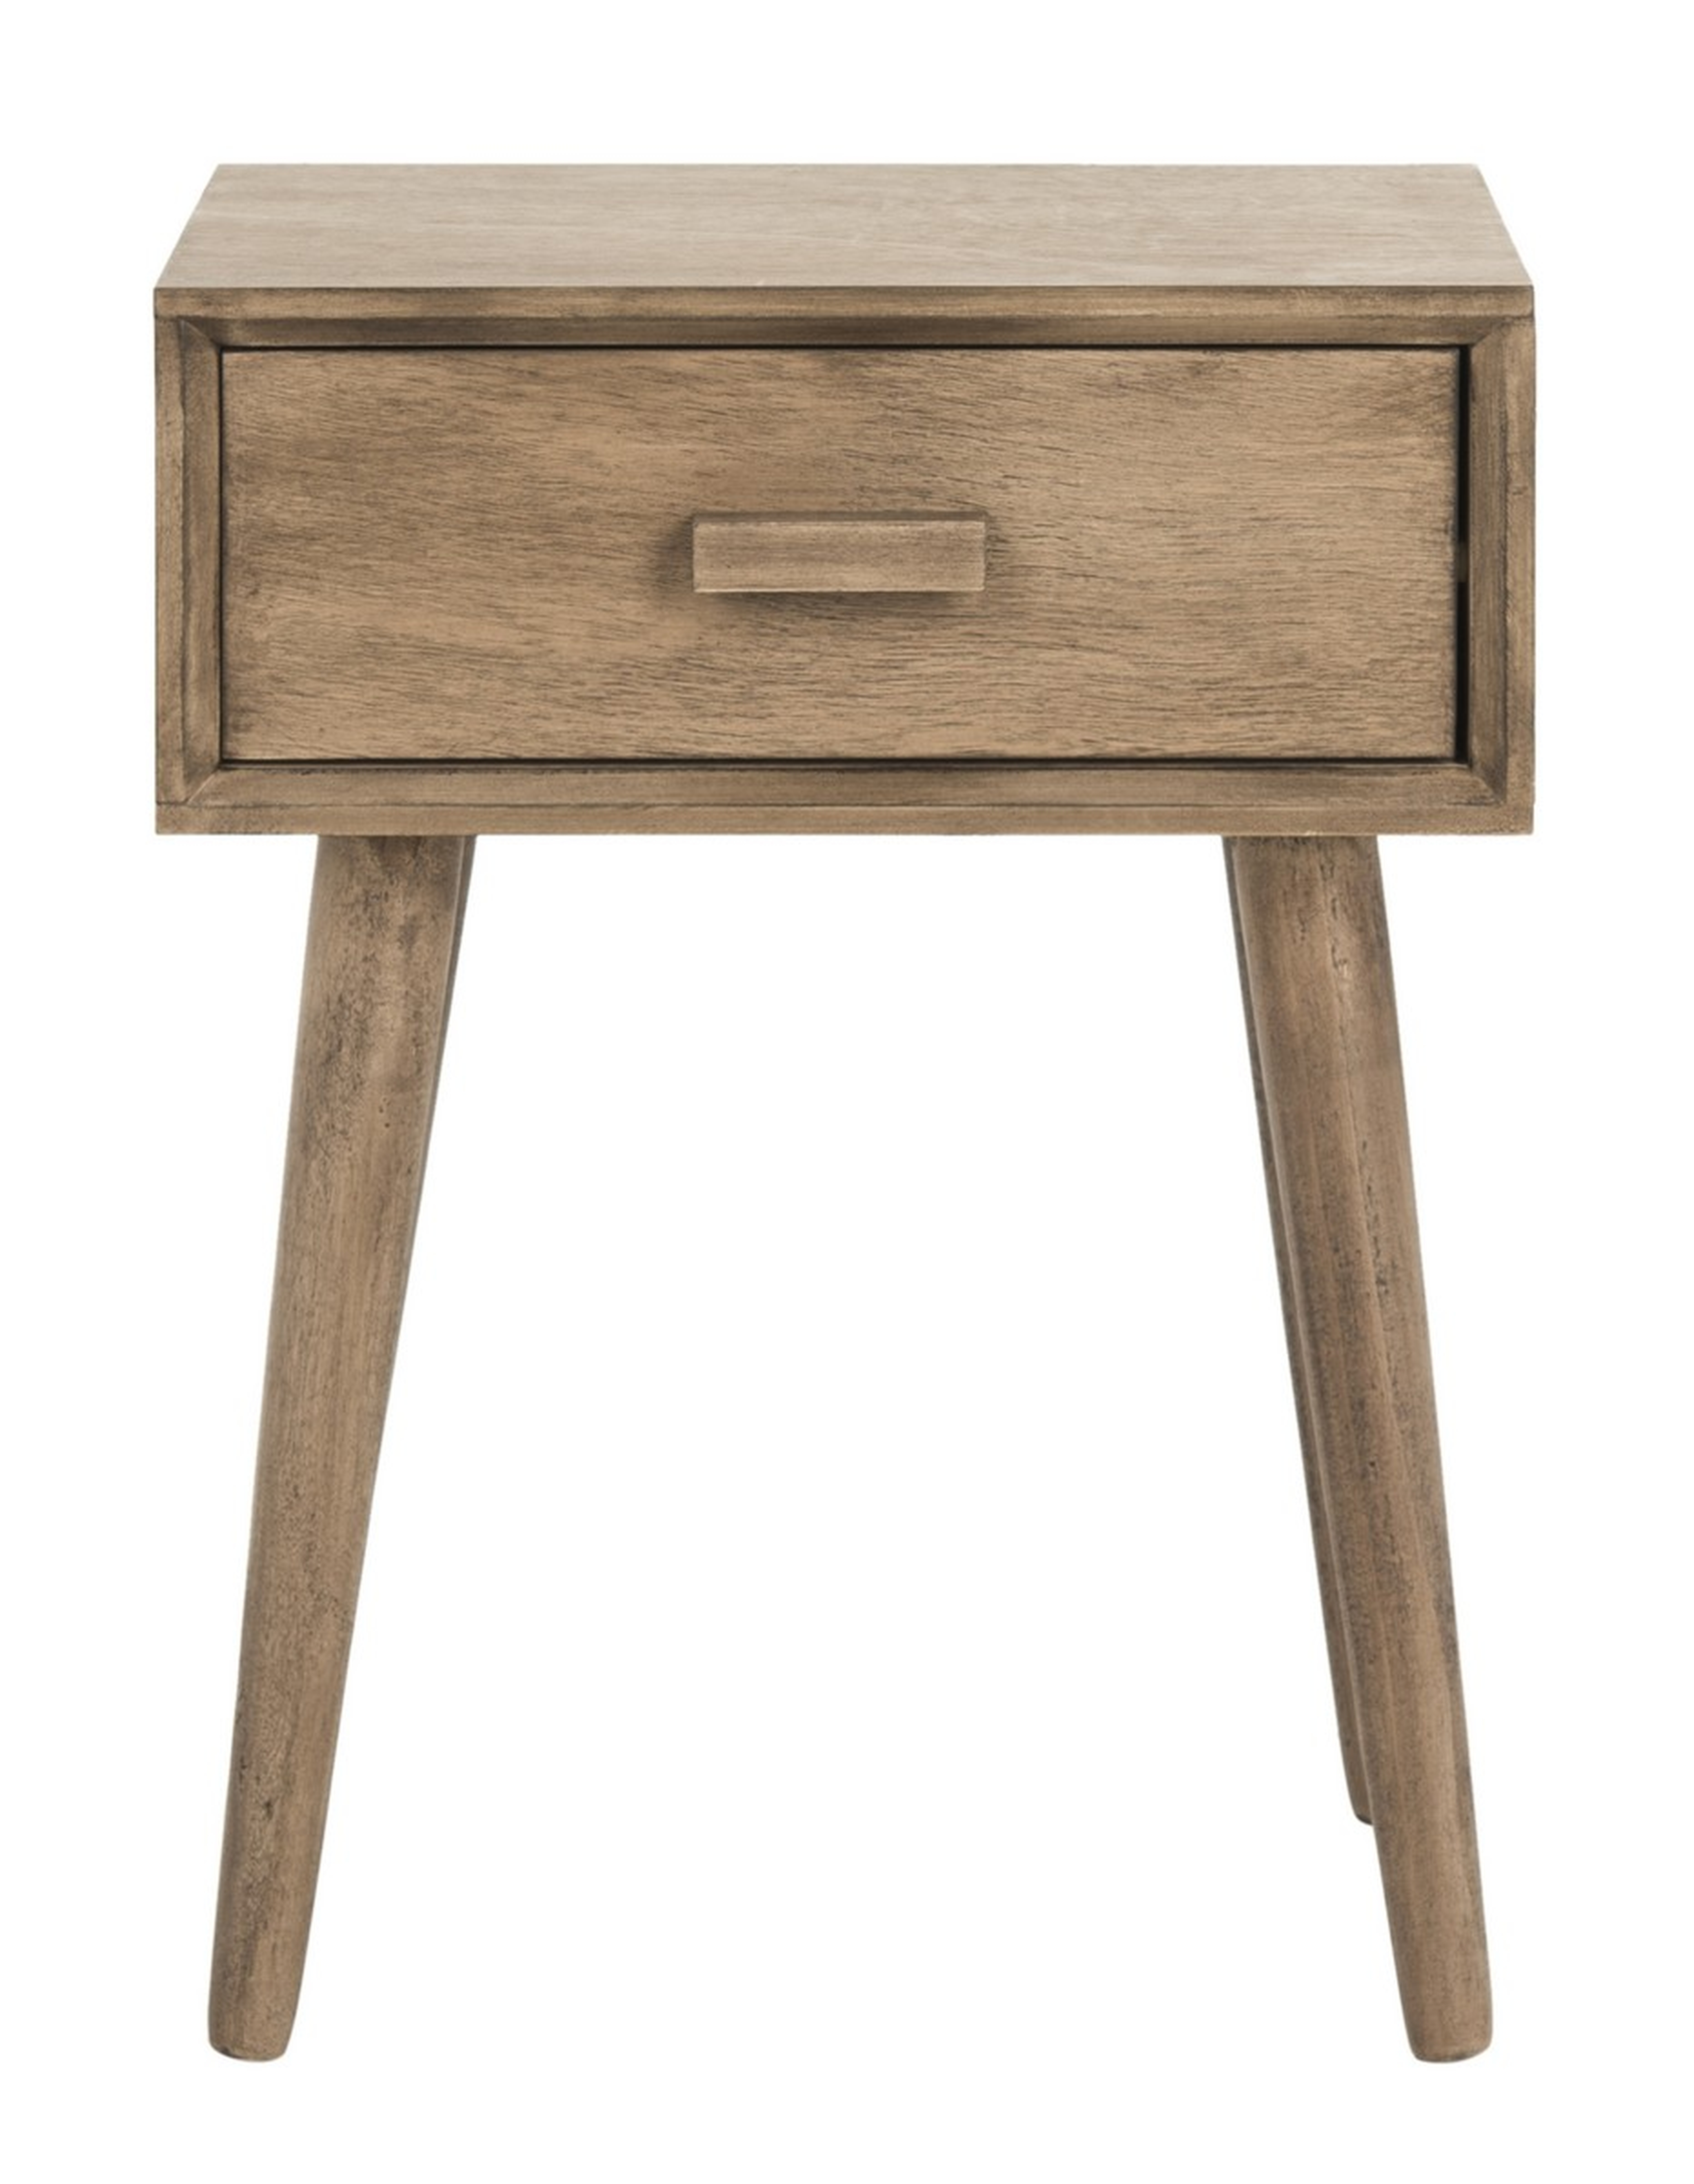 Lyle Accent Table, Chocolate - Arlo Home